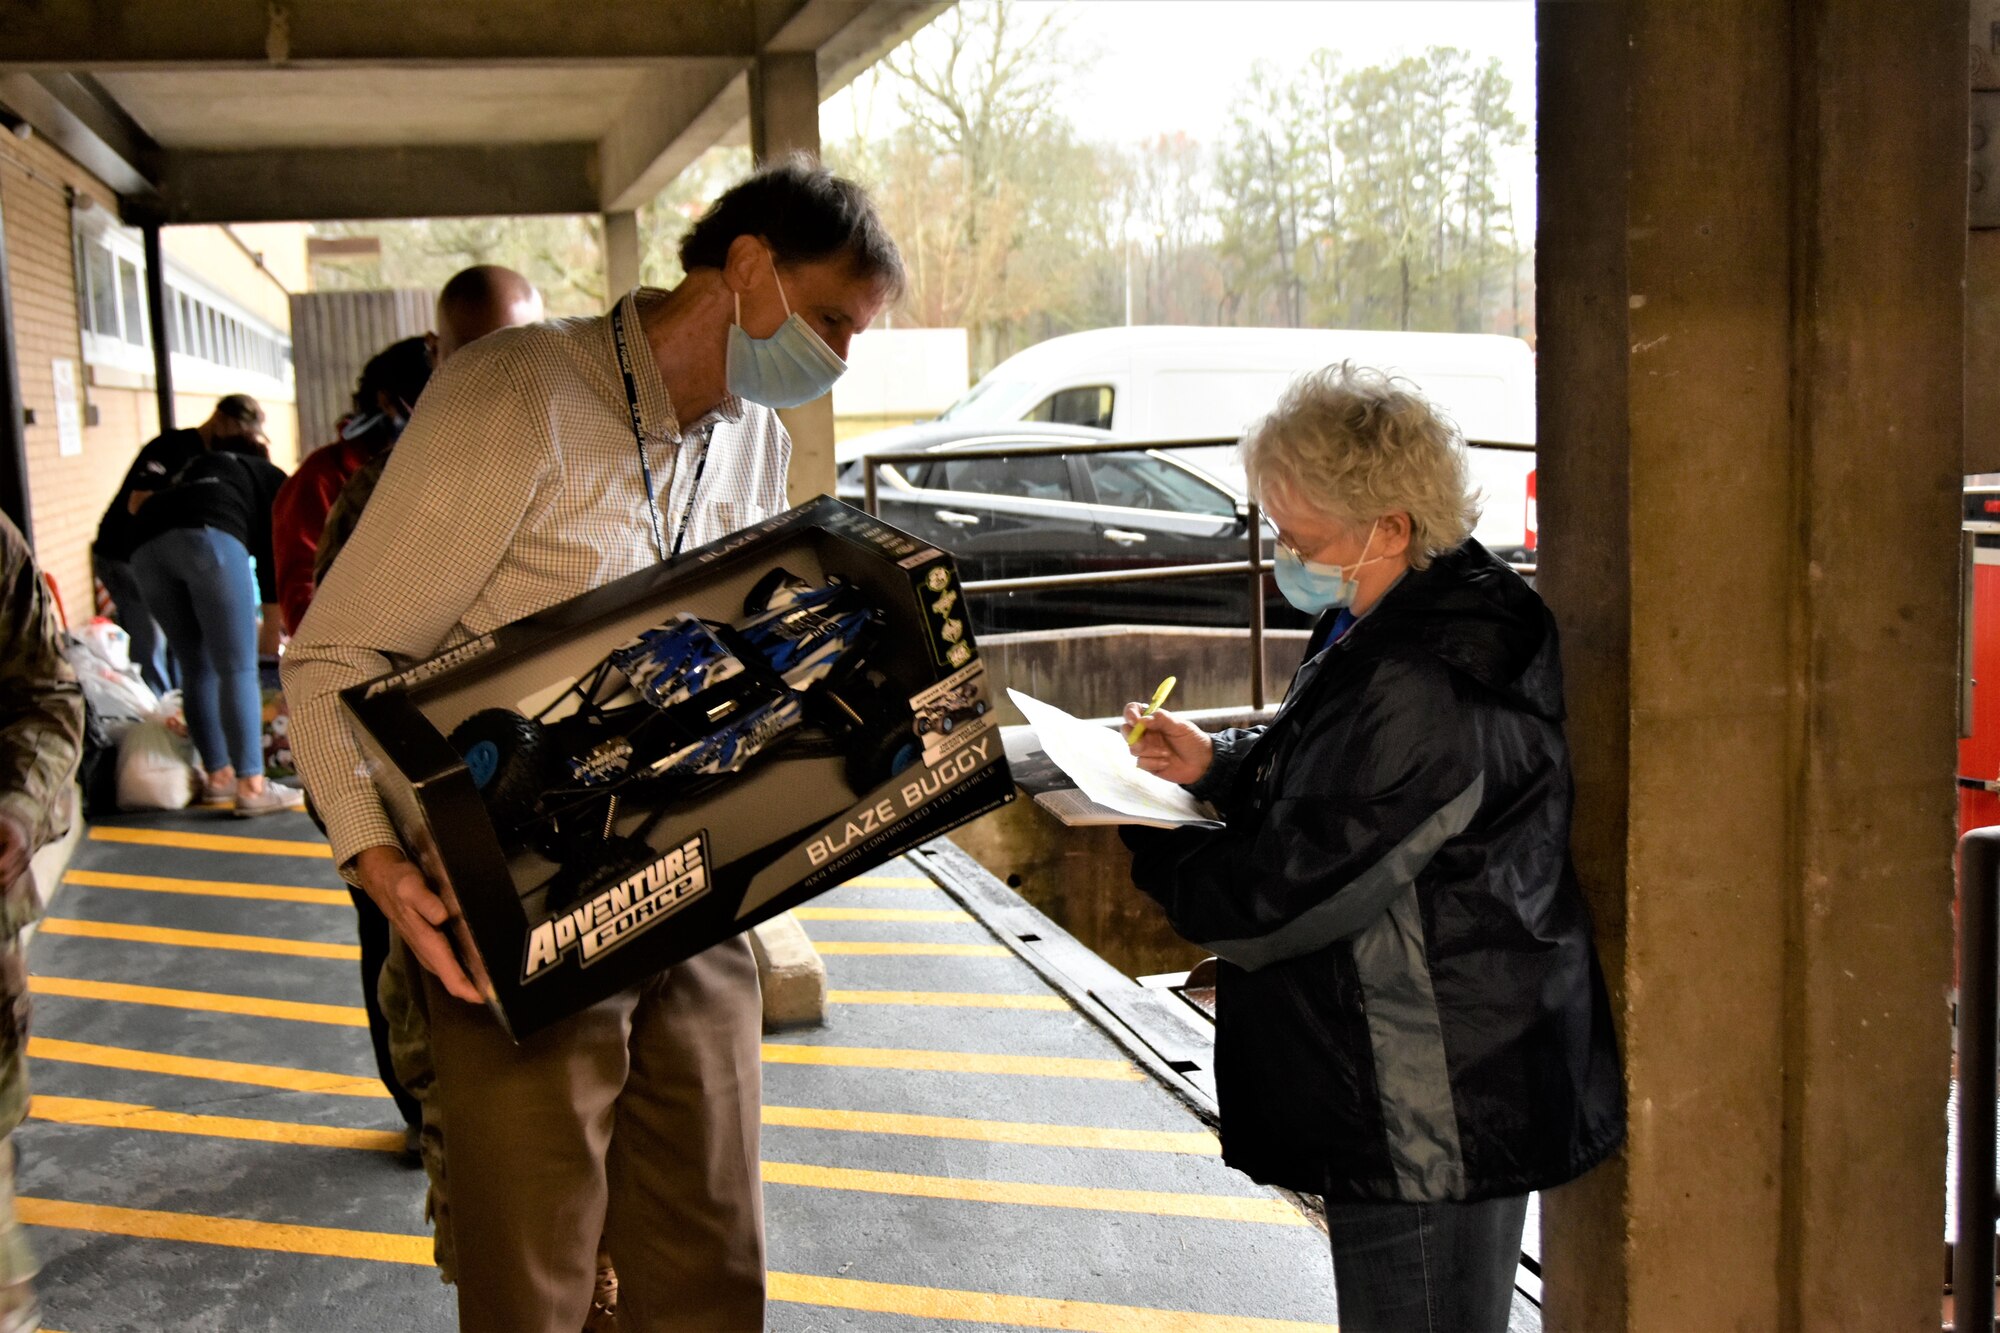 Arnold Engineering Development Complex team member Pat Long, left, makes sure a gift purchased by an Arnold Air Force Base employee during the 2021 Angel Tree drive is checked off by Carlene White with the Center for Family Development before it is loaded for transport off the base on Dec. 6, 2021. The workforce at Arnold provided Christmas gifts for more than 200 area children during the latest Angel Tree campaign. (U.S. Air Force photo by Bradley Hicks)